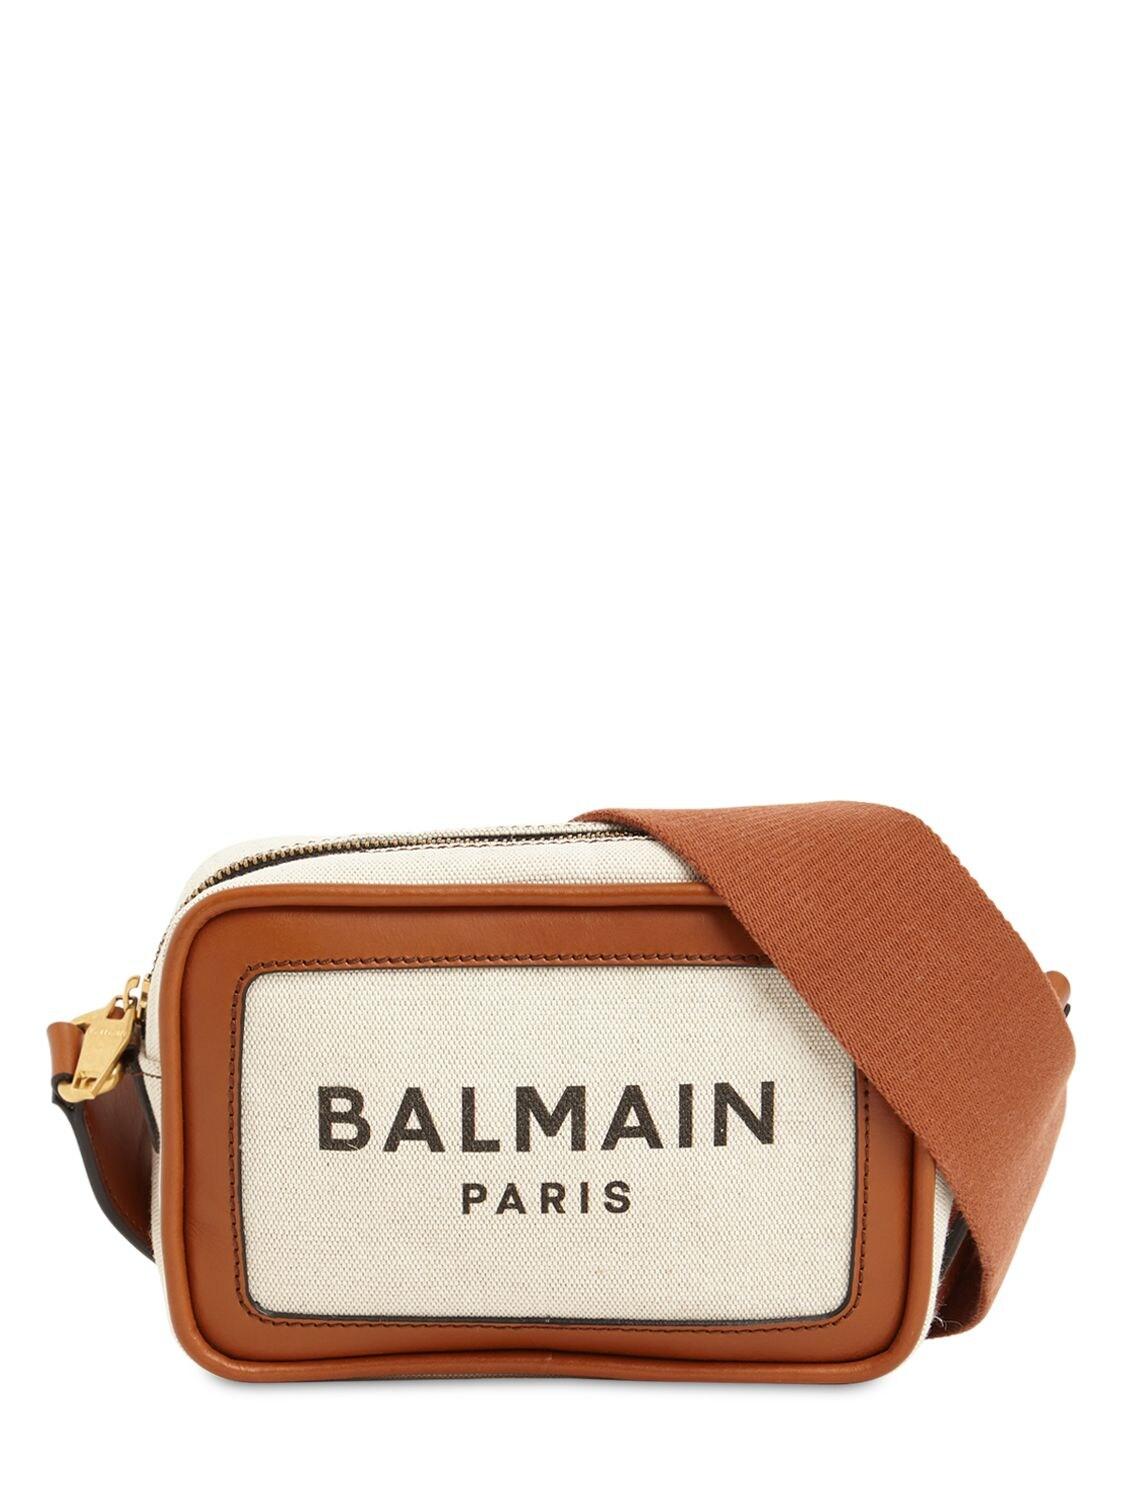 Balmain Barmy Canvas & Leather Camera Bag in Natural Lyst